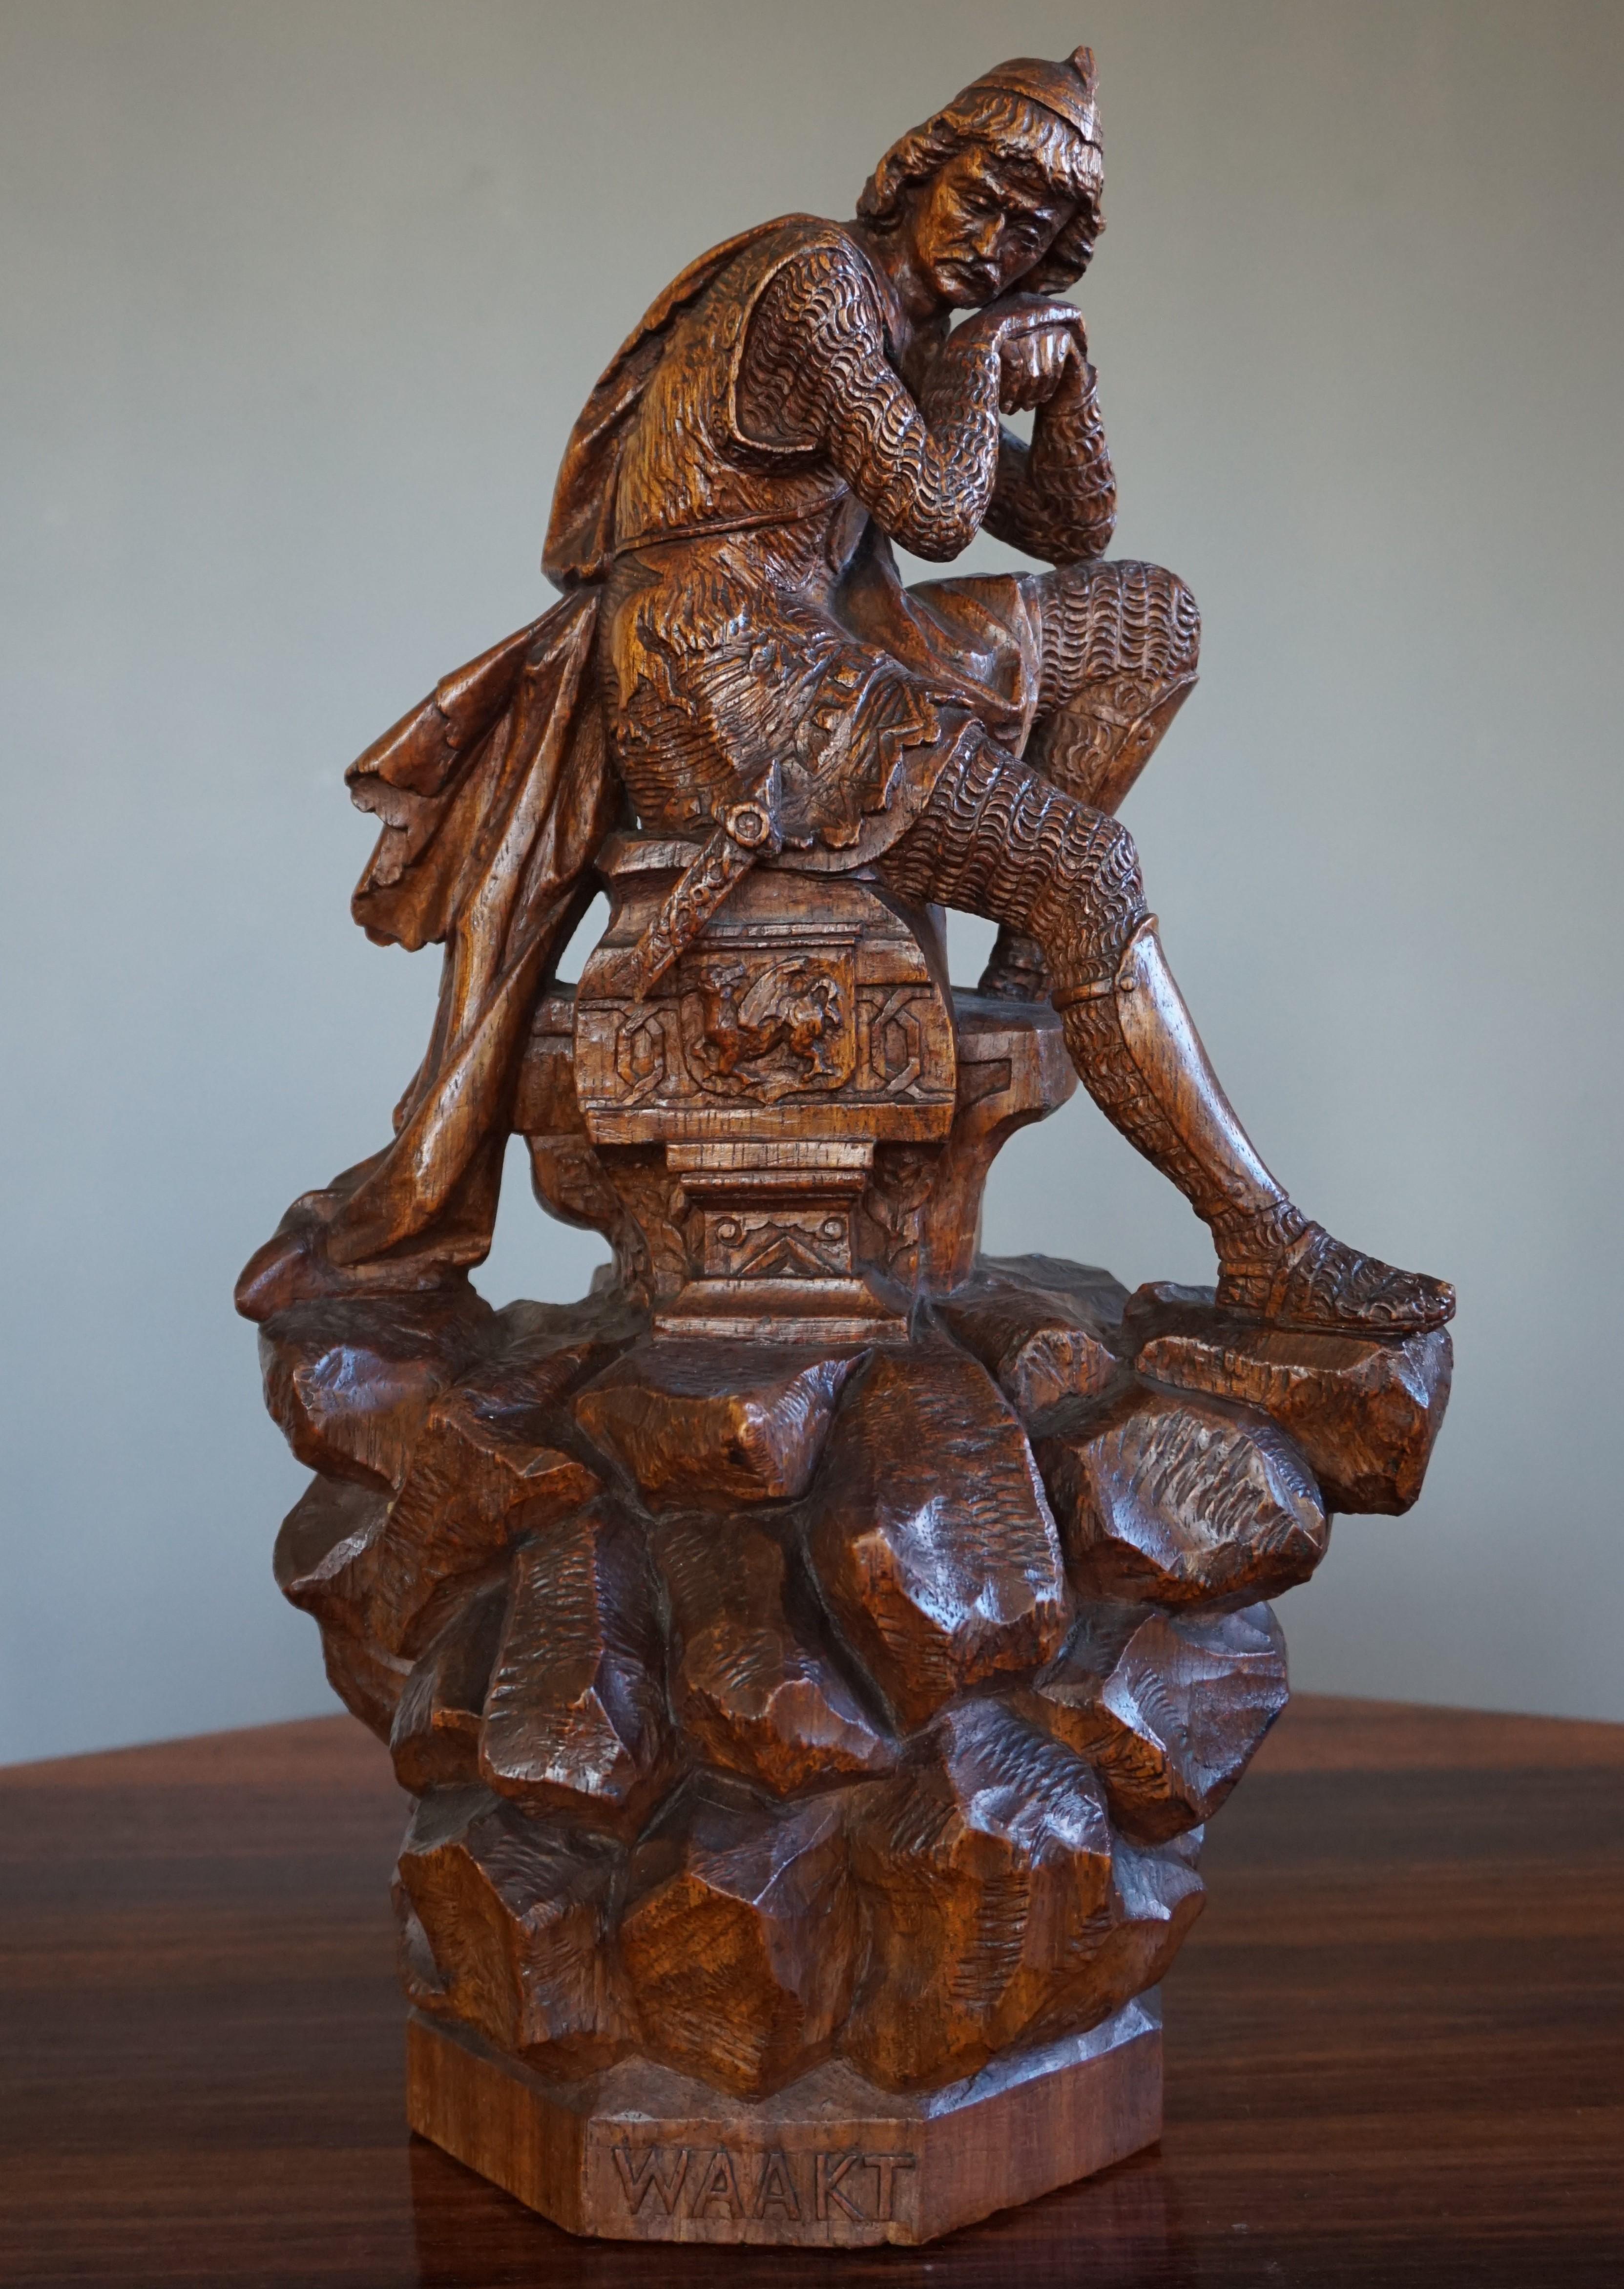 Artistic and highly decorative knight sculpture.

This masterful sculpture is all hand-carved out of a single log of oakwood. Realistic knight sculptures that are hand-carved out of wood are very rare. To have found one of this amazing quality and